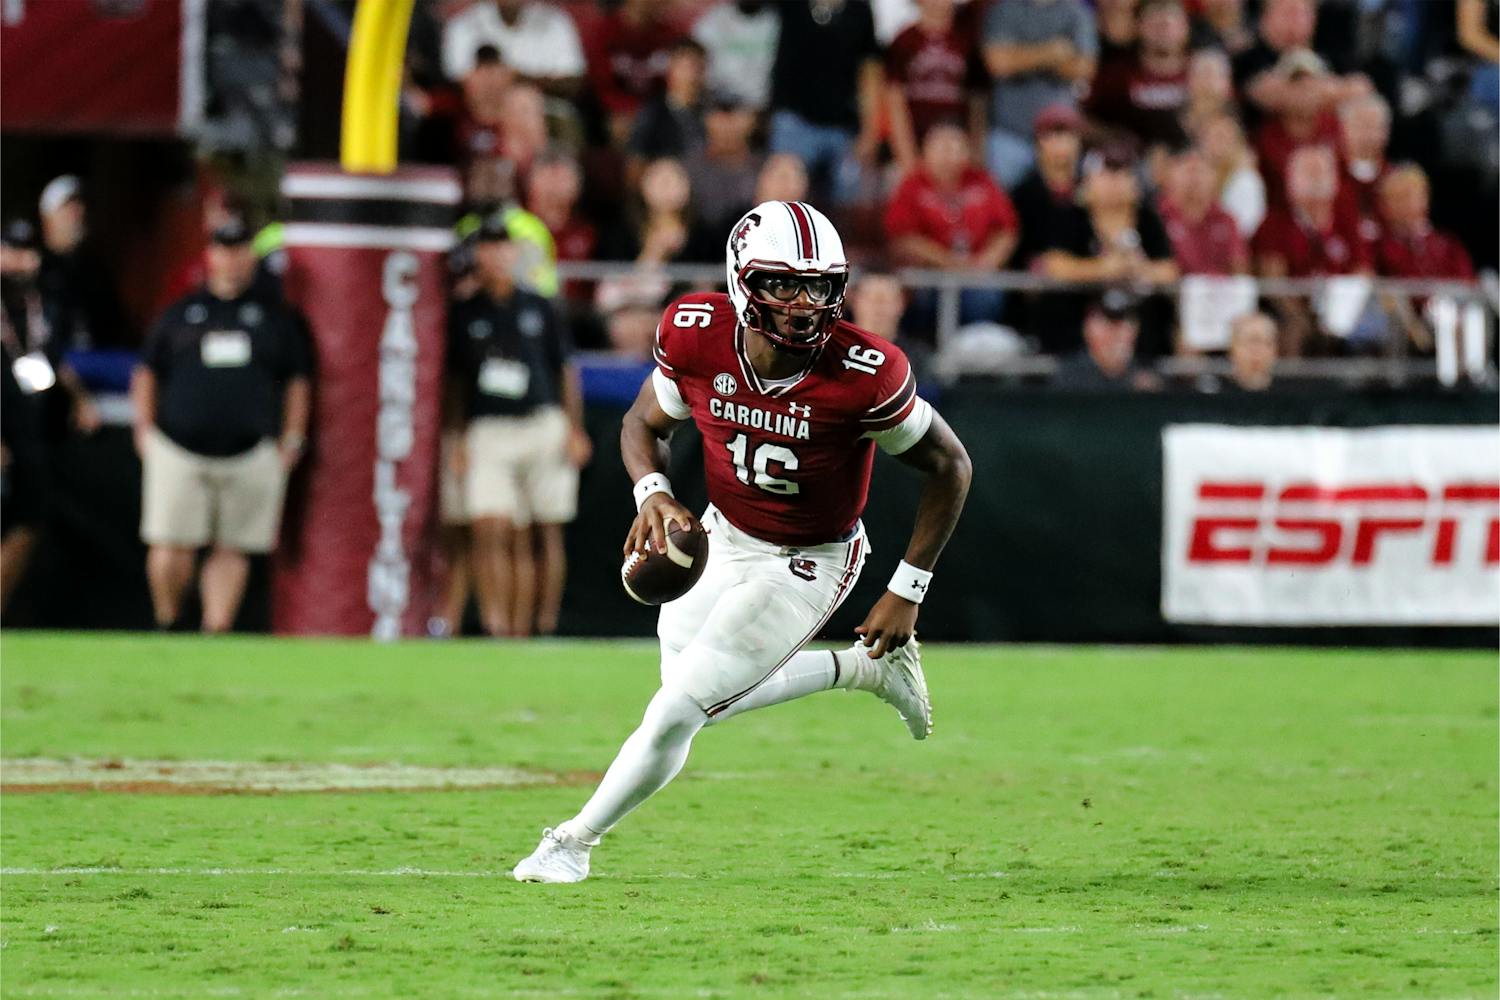 Freshman quarterback LaNorris Sellers looks for an open player to throw the ball to late in South Carolina's 47-21 victory over Furman. A former top five recruit in the state, Sellers made his official debut and passed for 86 yards and two touchdowns against the Paladins.